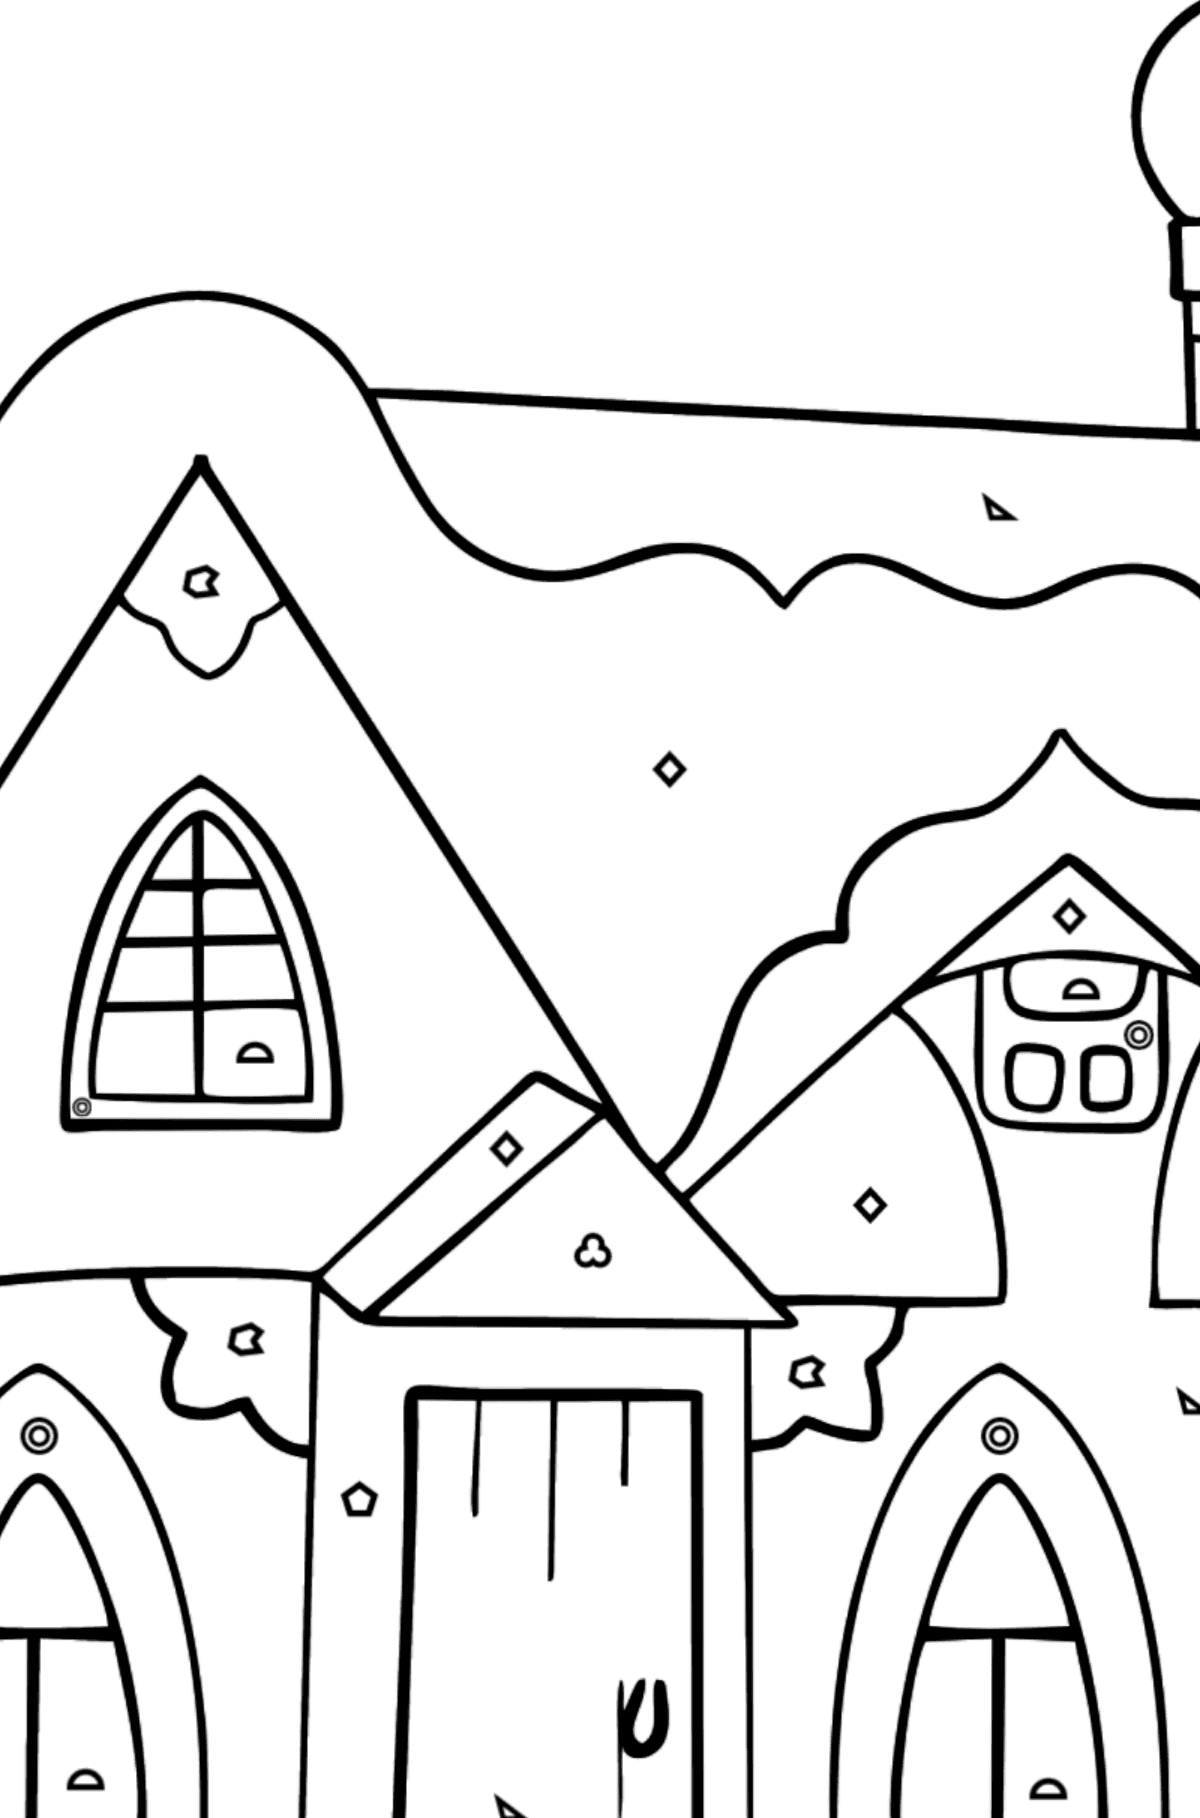 Coloring Page - A Fairytale House - Coloring by Geometric Shapes for Kids